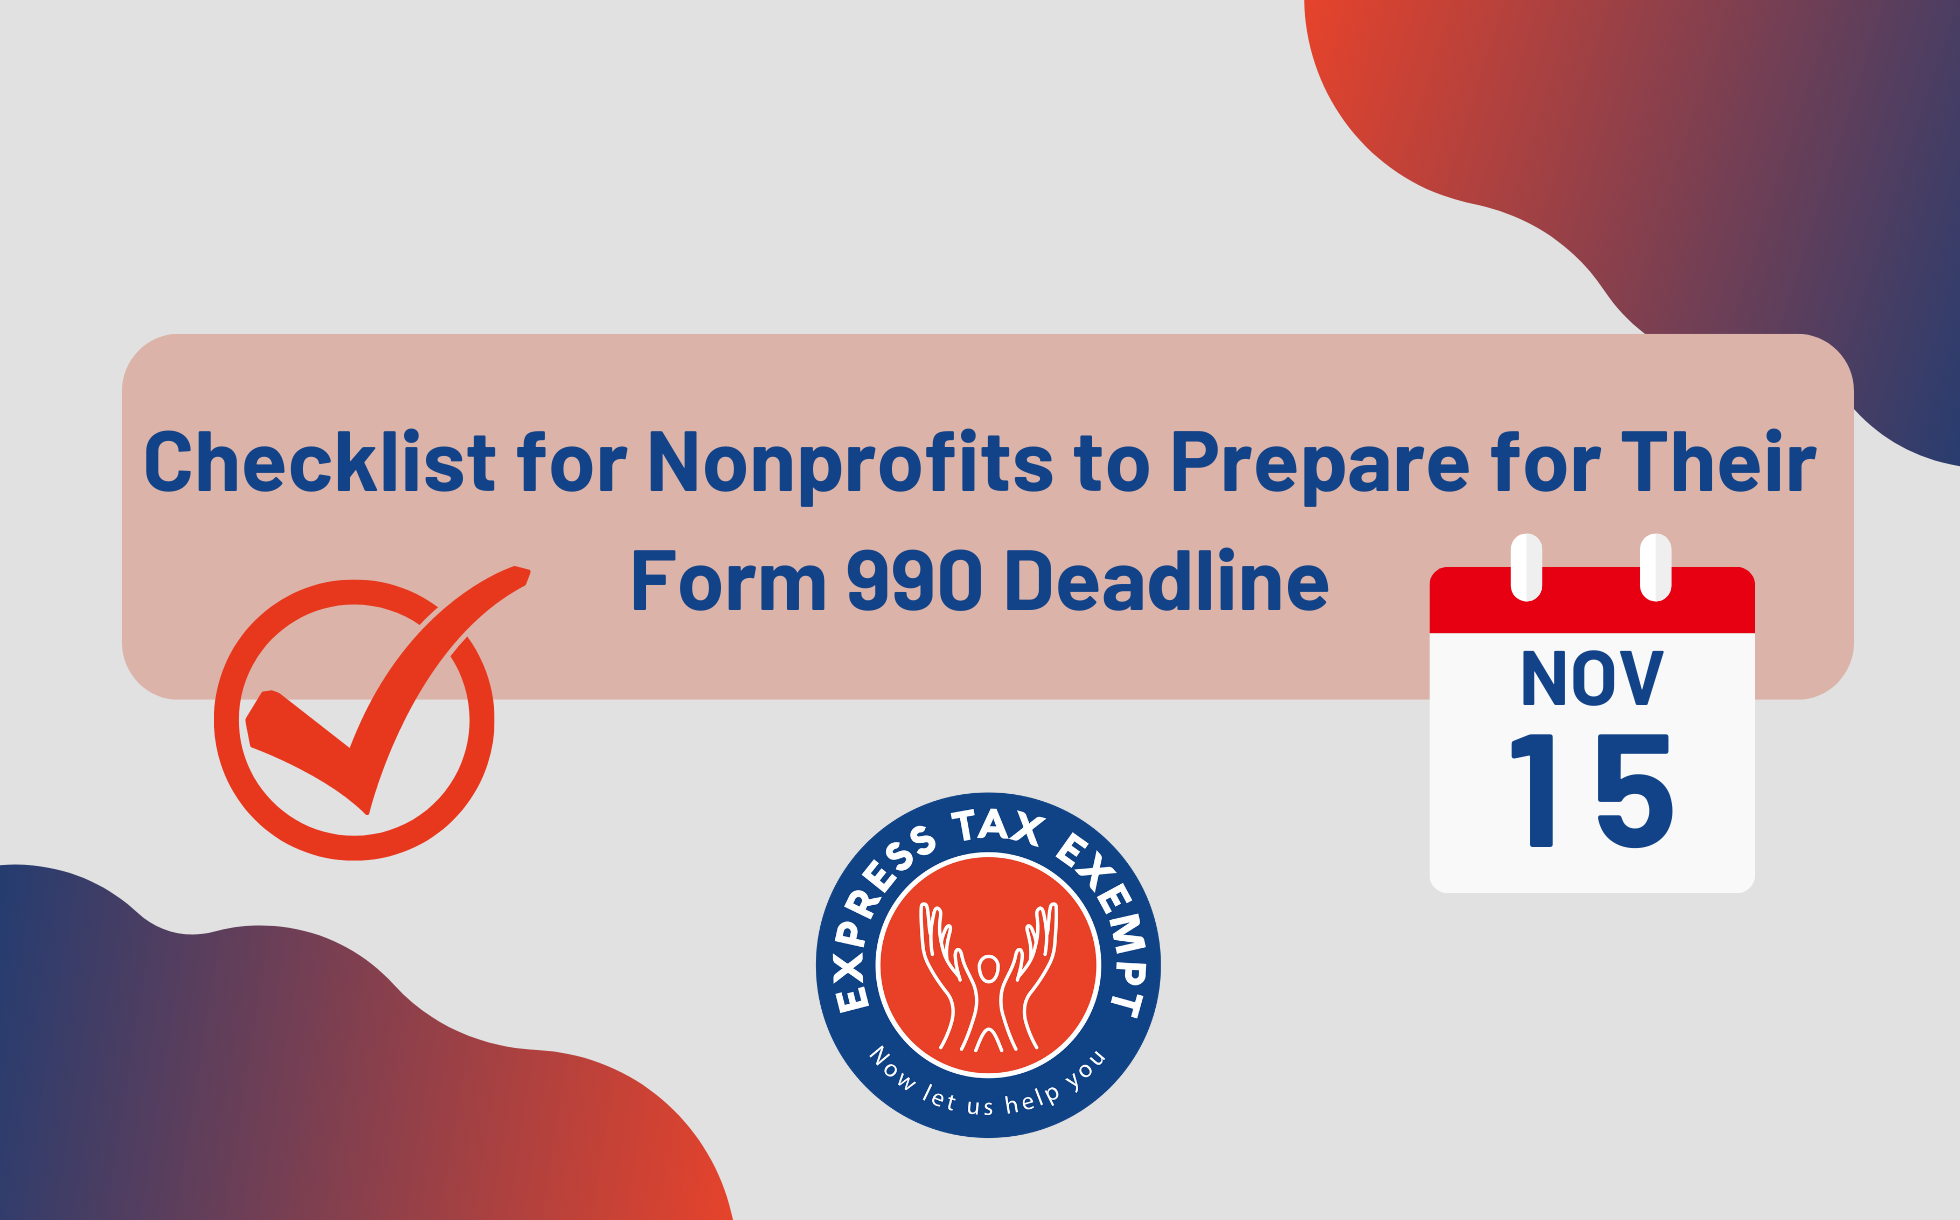 Checklist for Nonprofits to Prepare for Their Form 990 Deadline